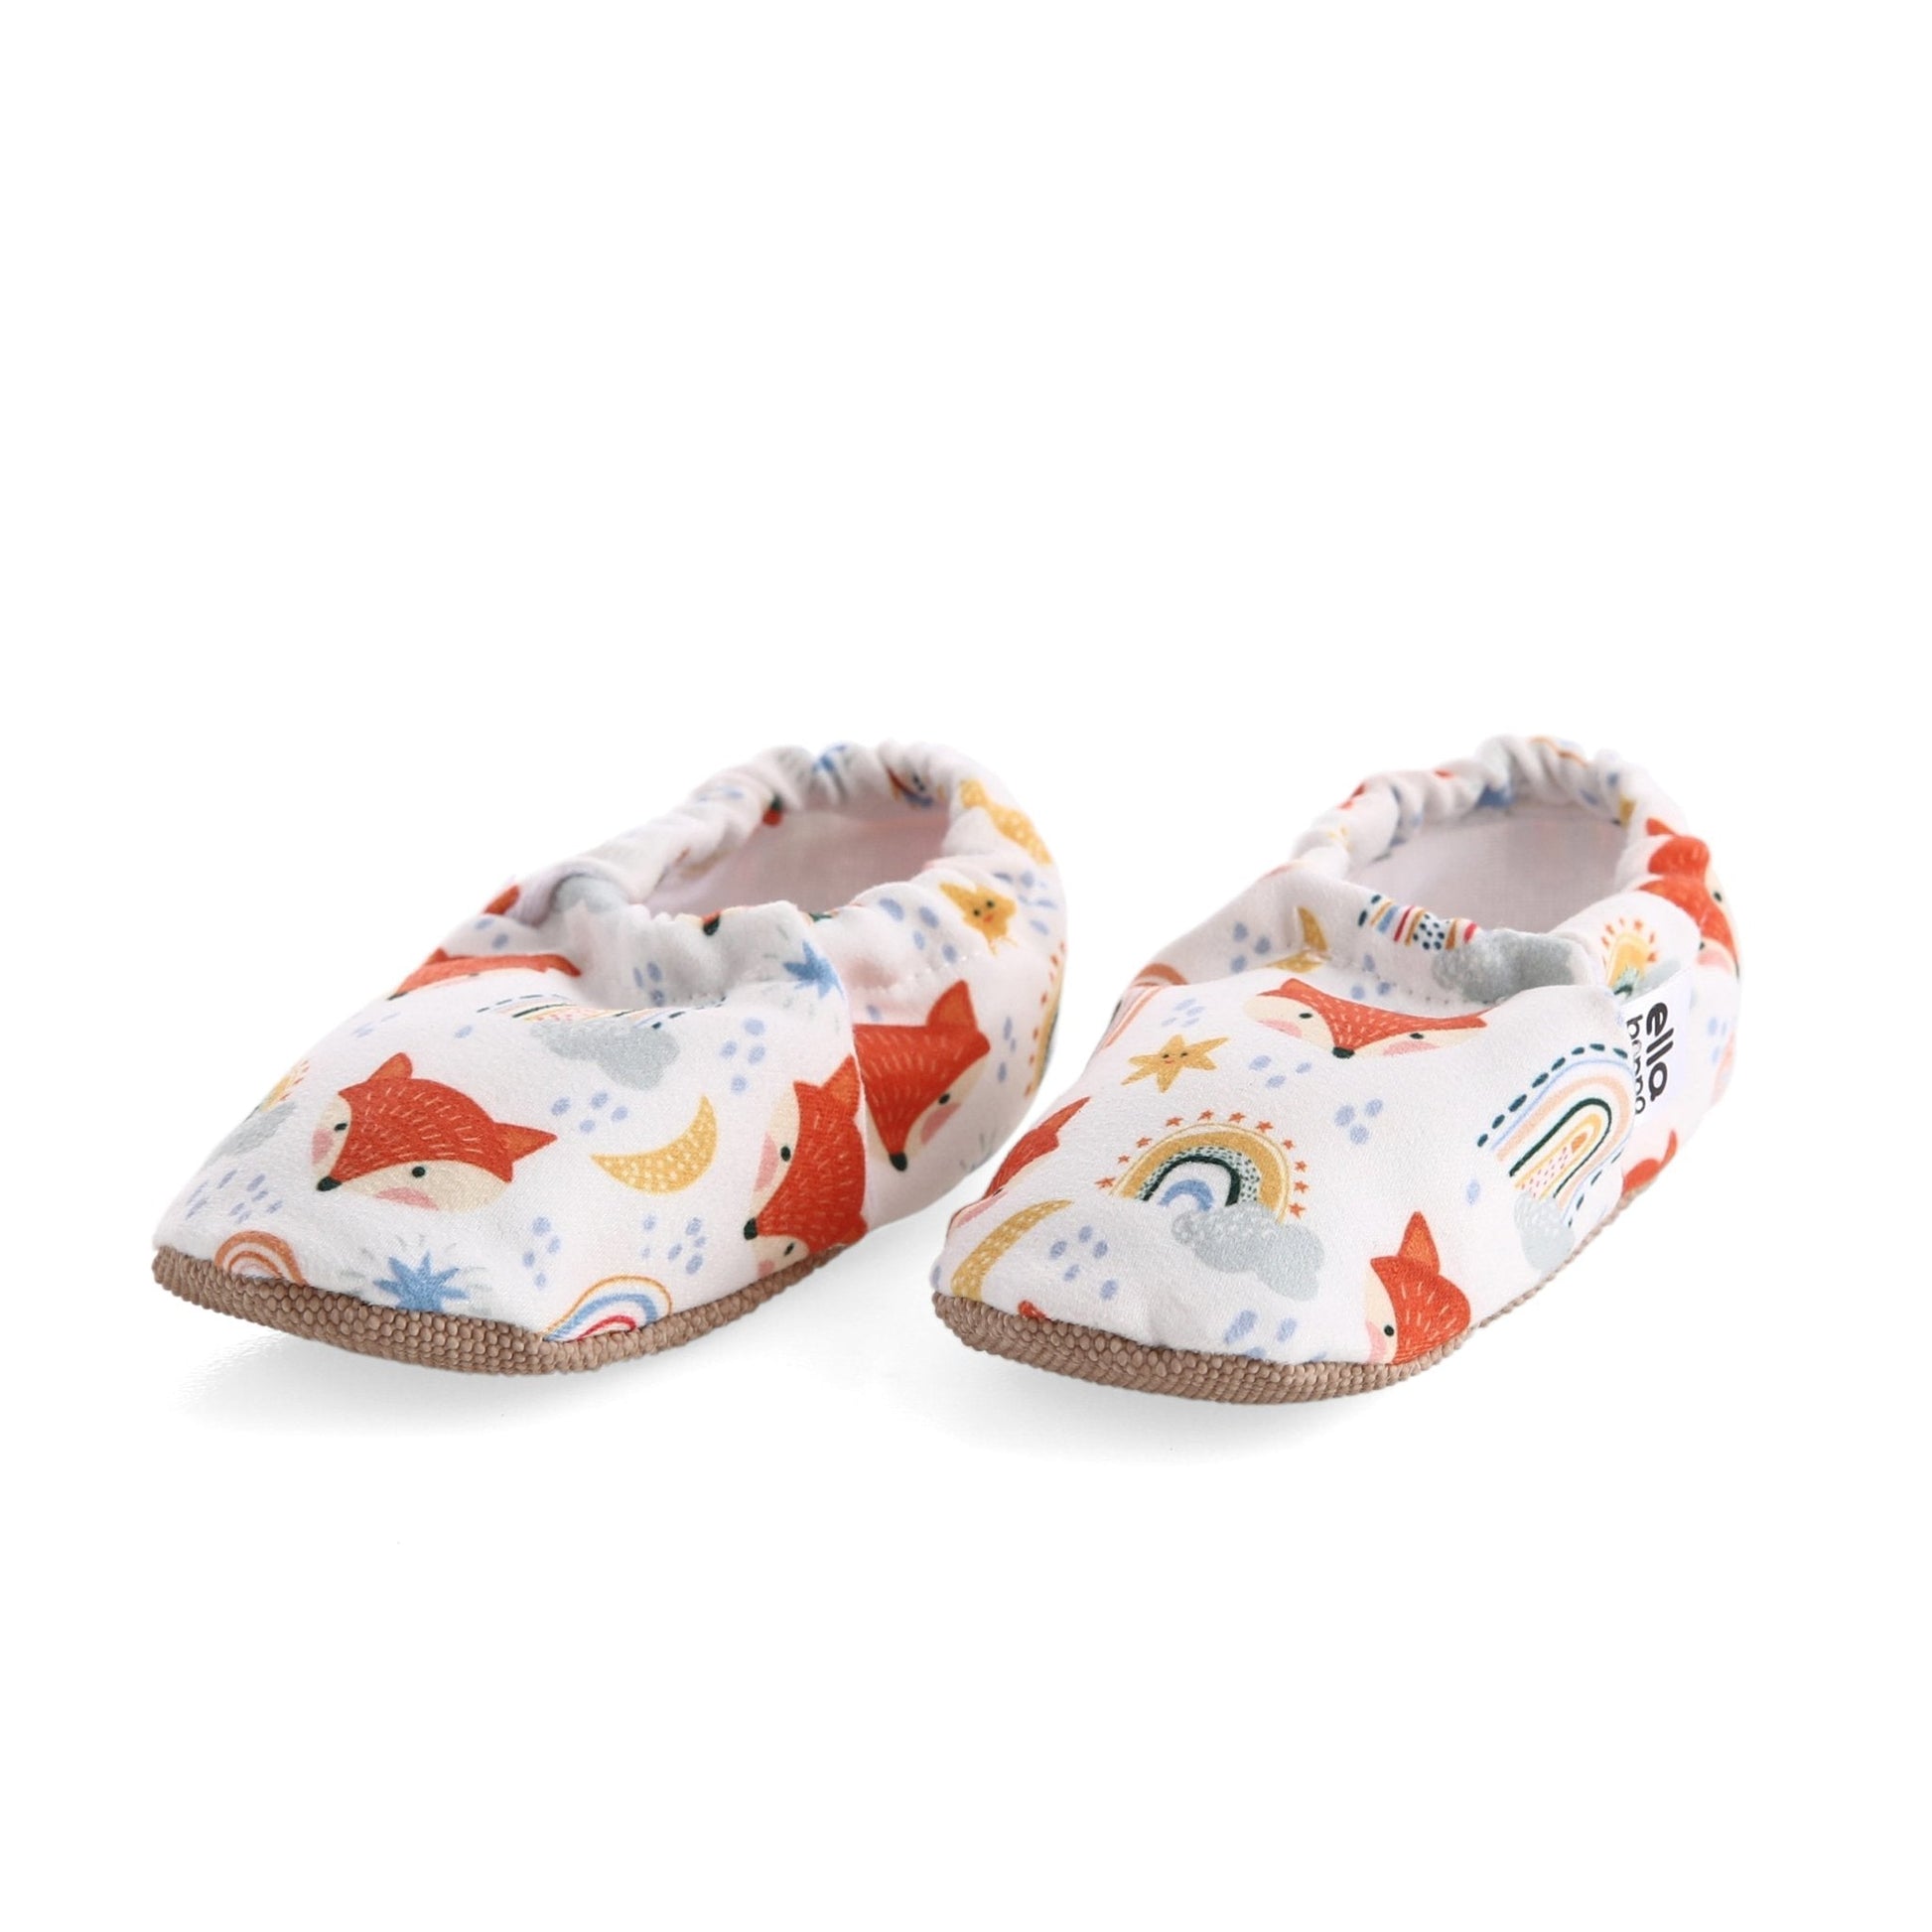 Fox Patterned Baby Booties